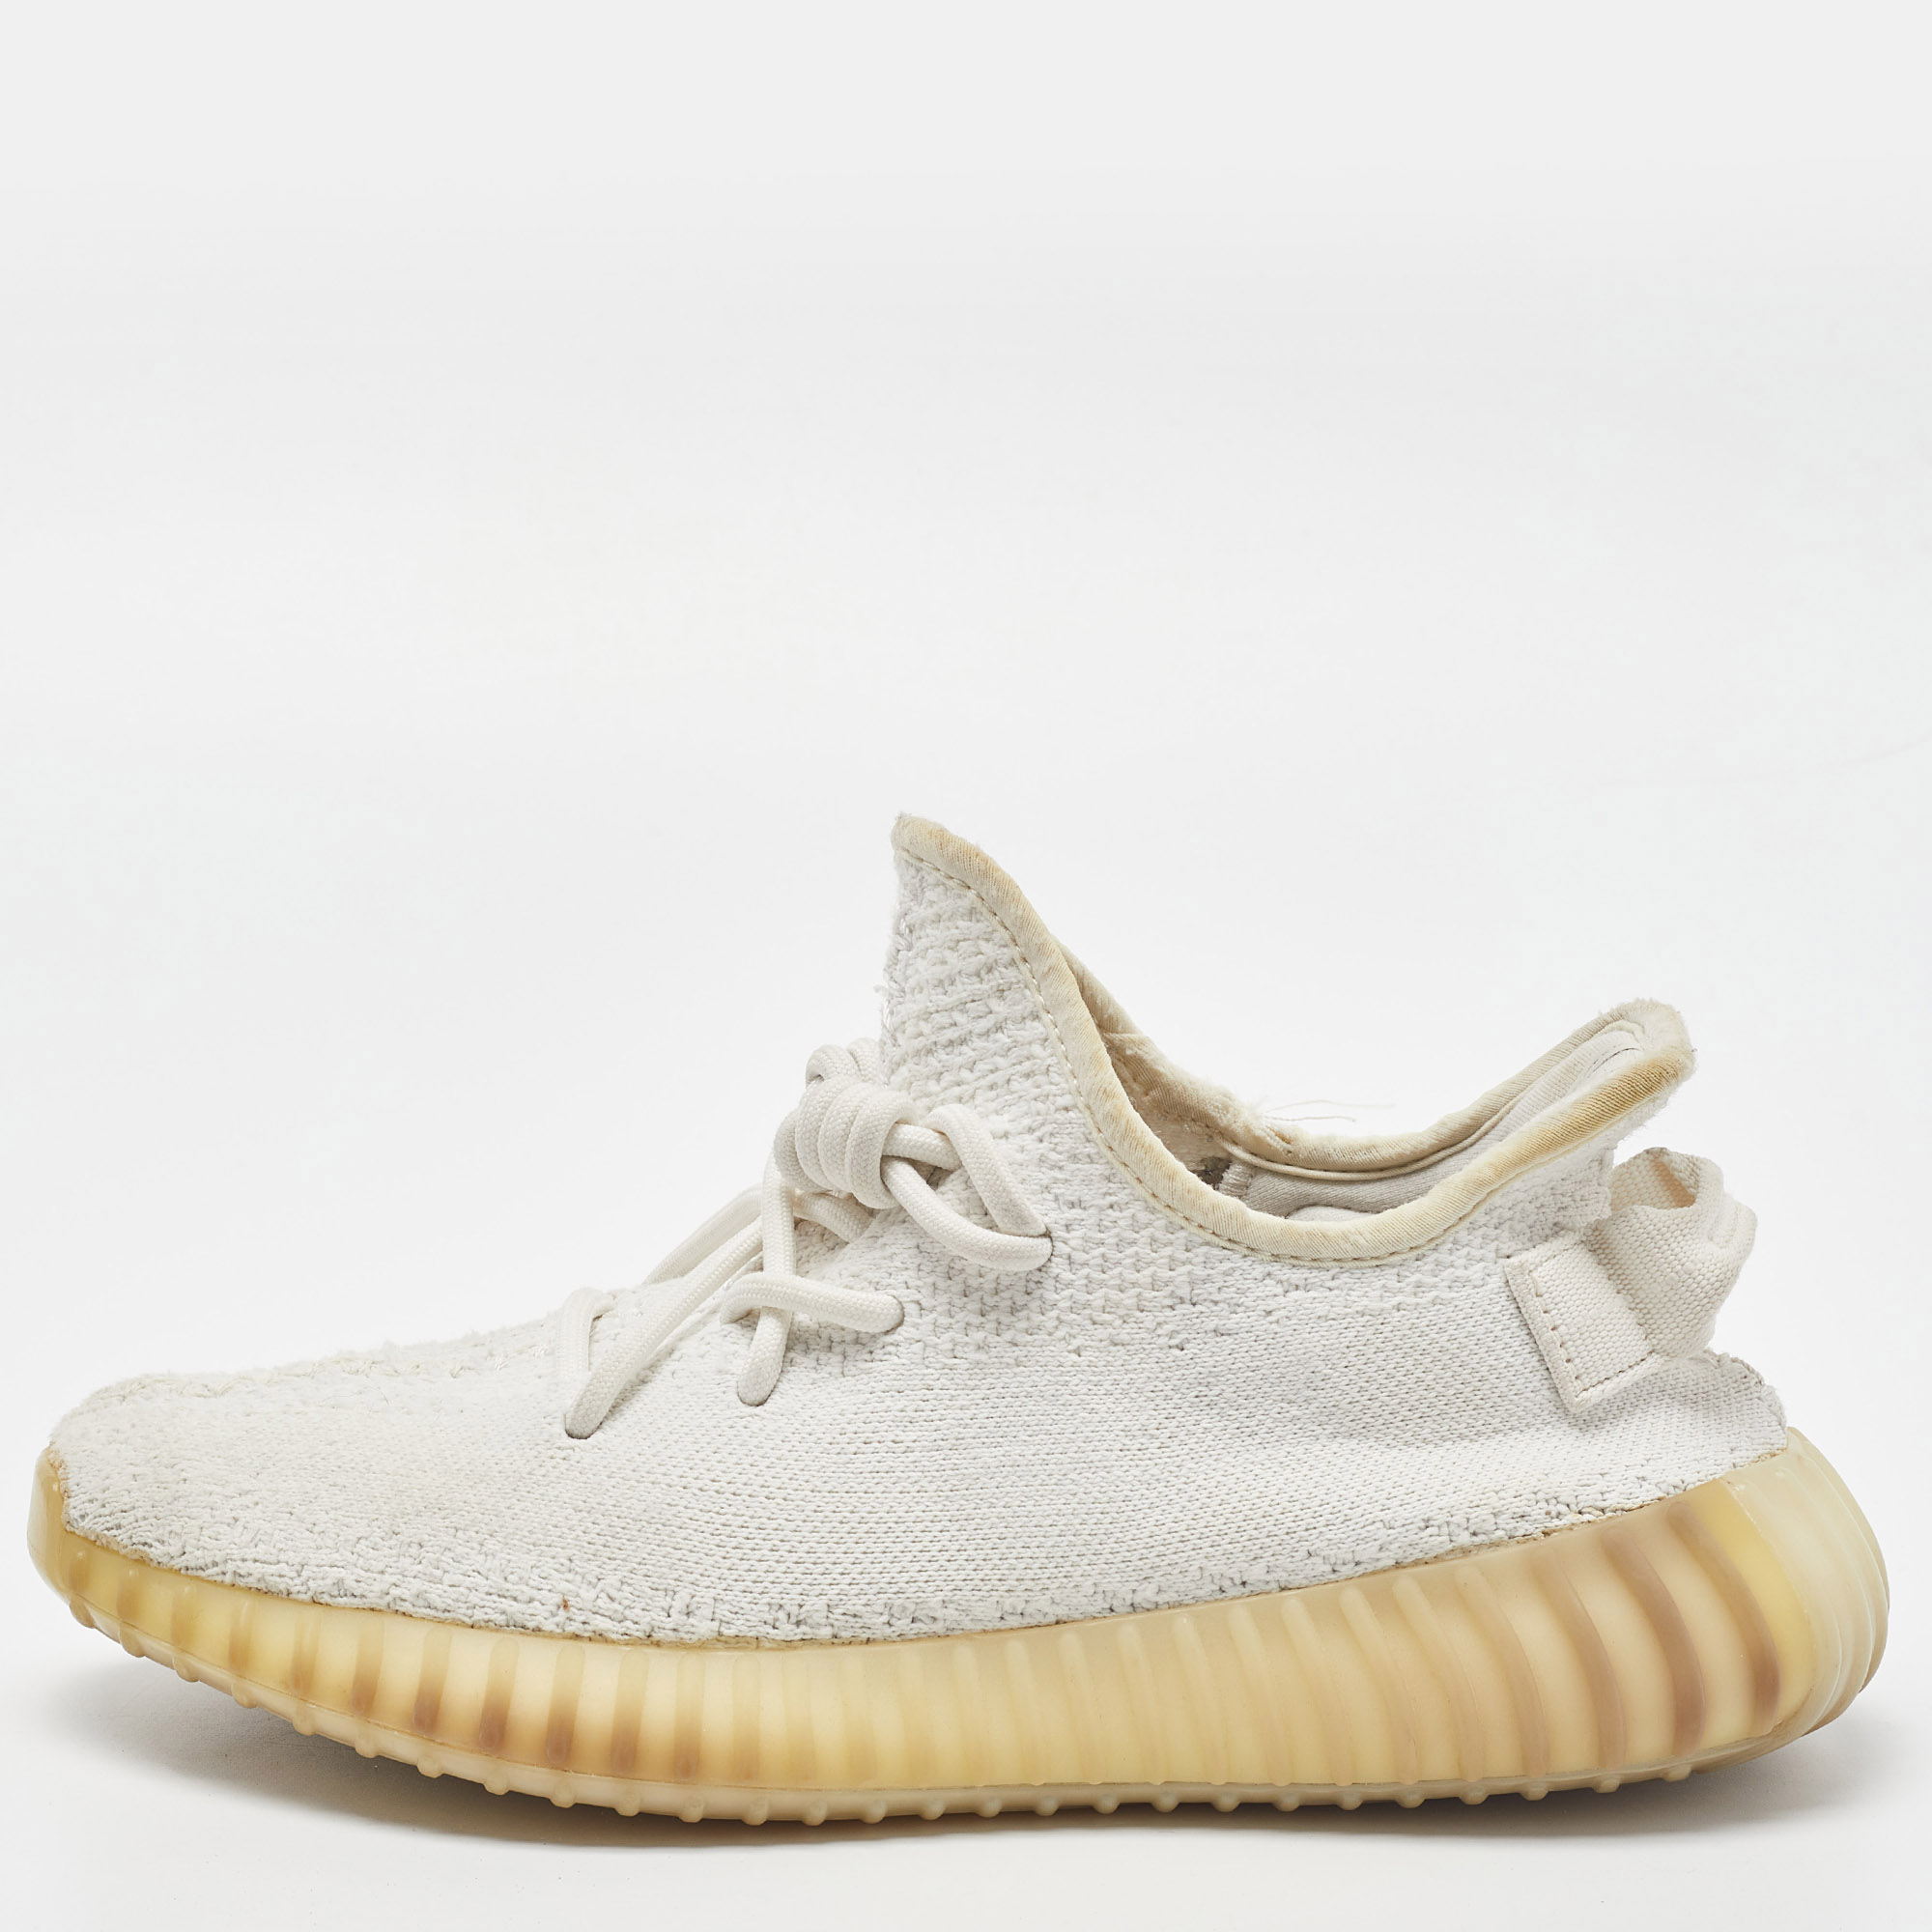 Pre-owned Yeezy X Adidas Cream Knit Fabric Boost 350 V2 Cream Sneakers Size 38 2/3